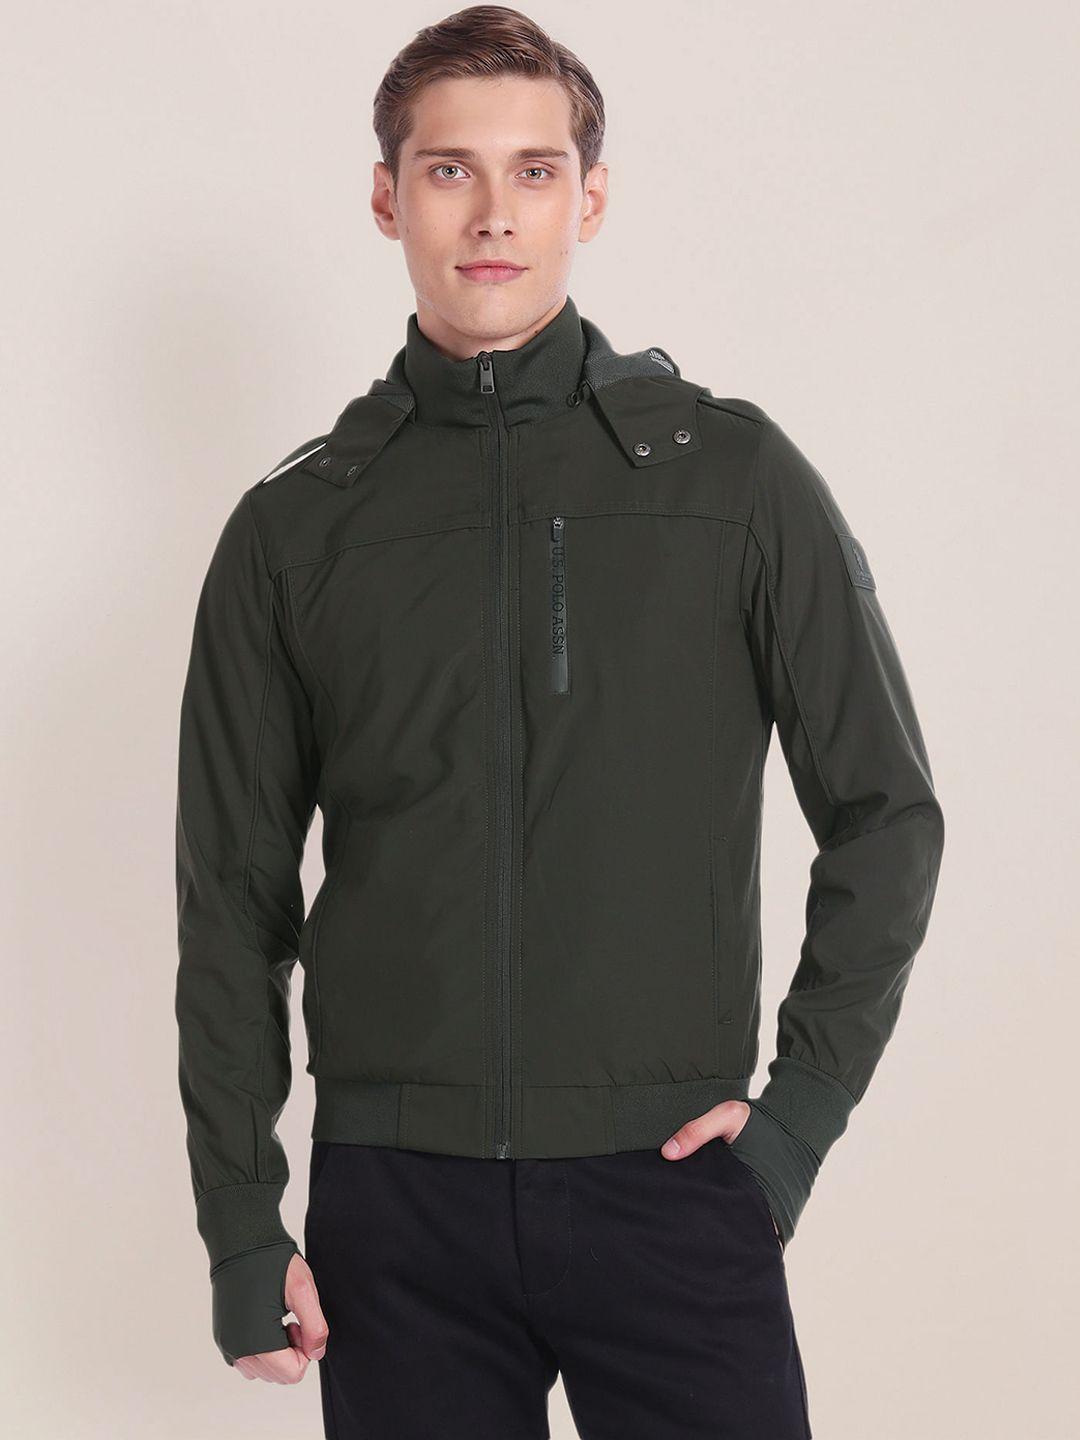 U.S. Polo Assn. Hooded Bomber Jacket With Detachable Neck Pillow